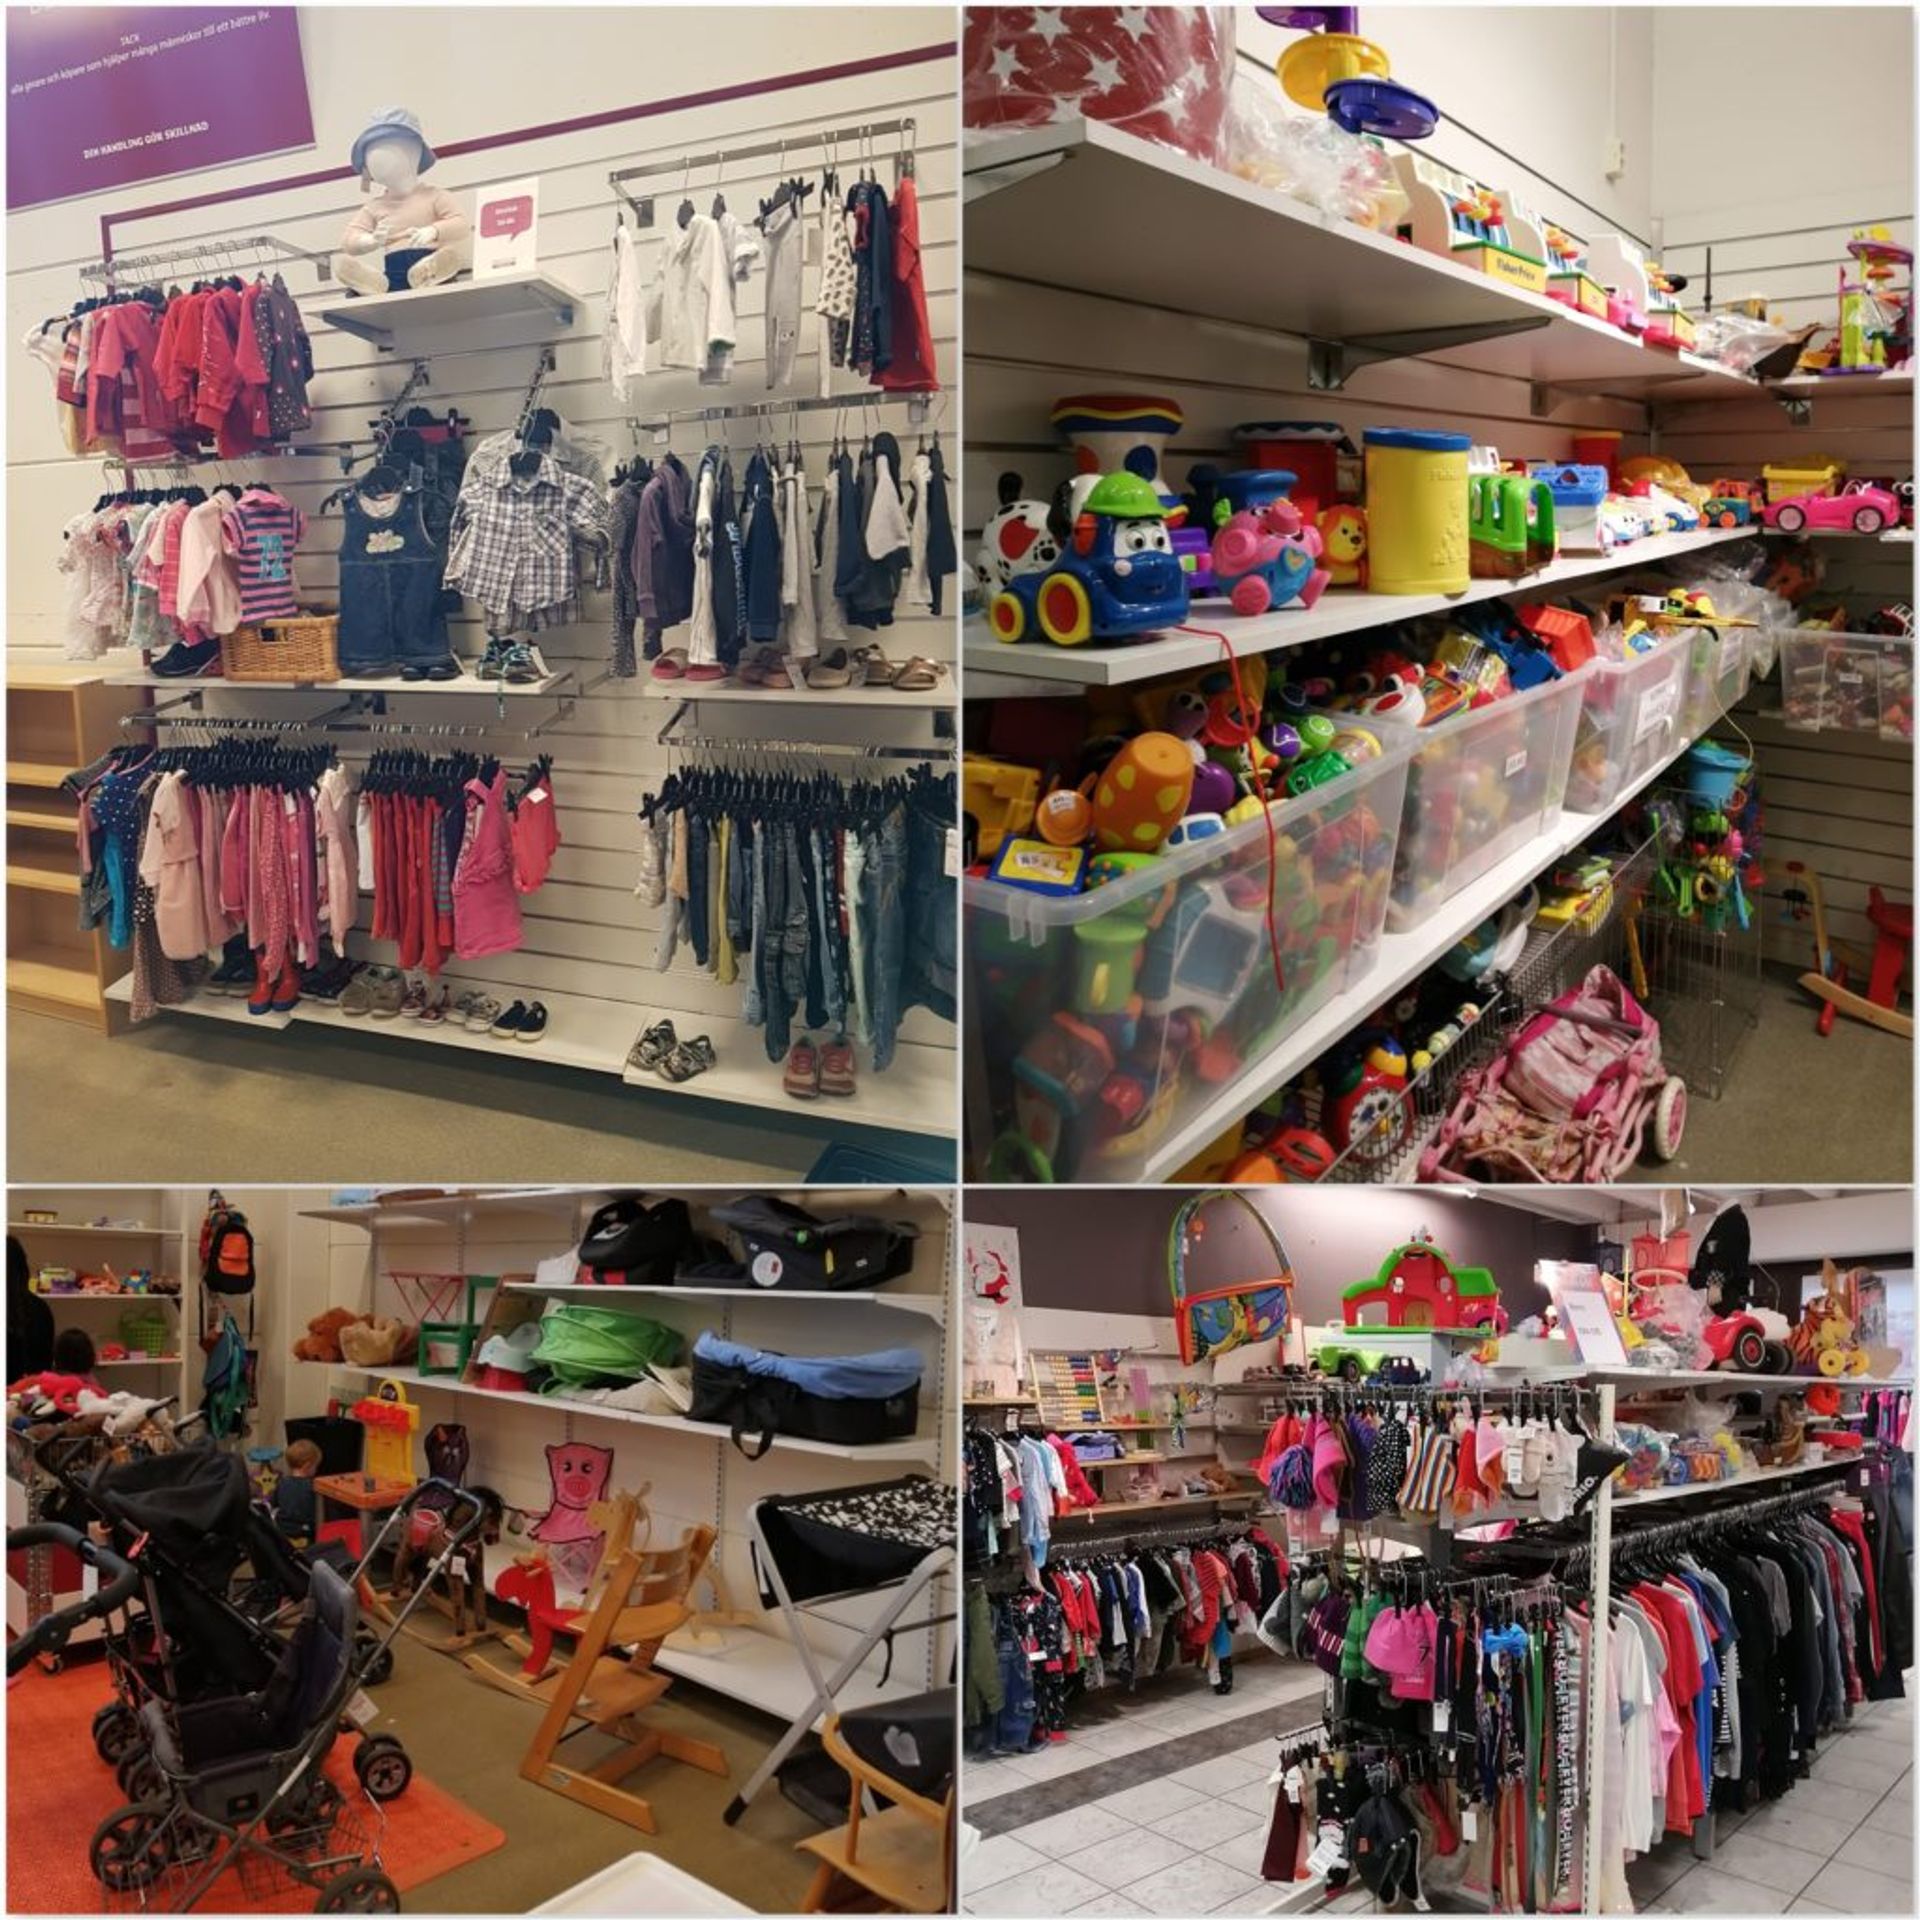 Racks and shelves of children's clothing, toys and prams.